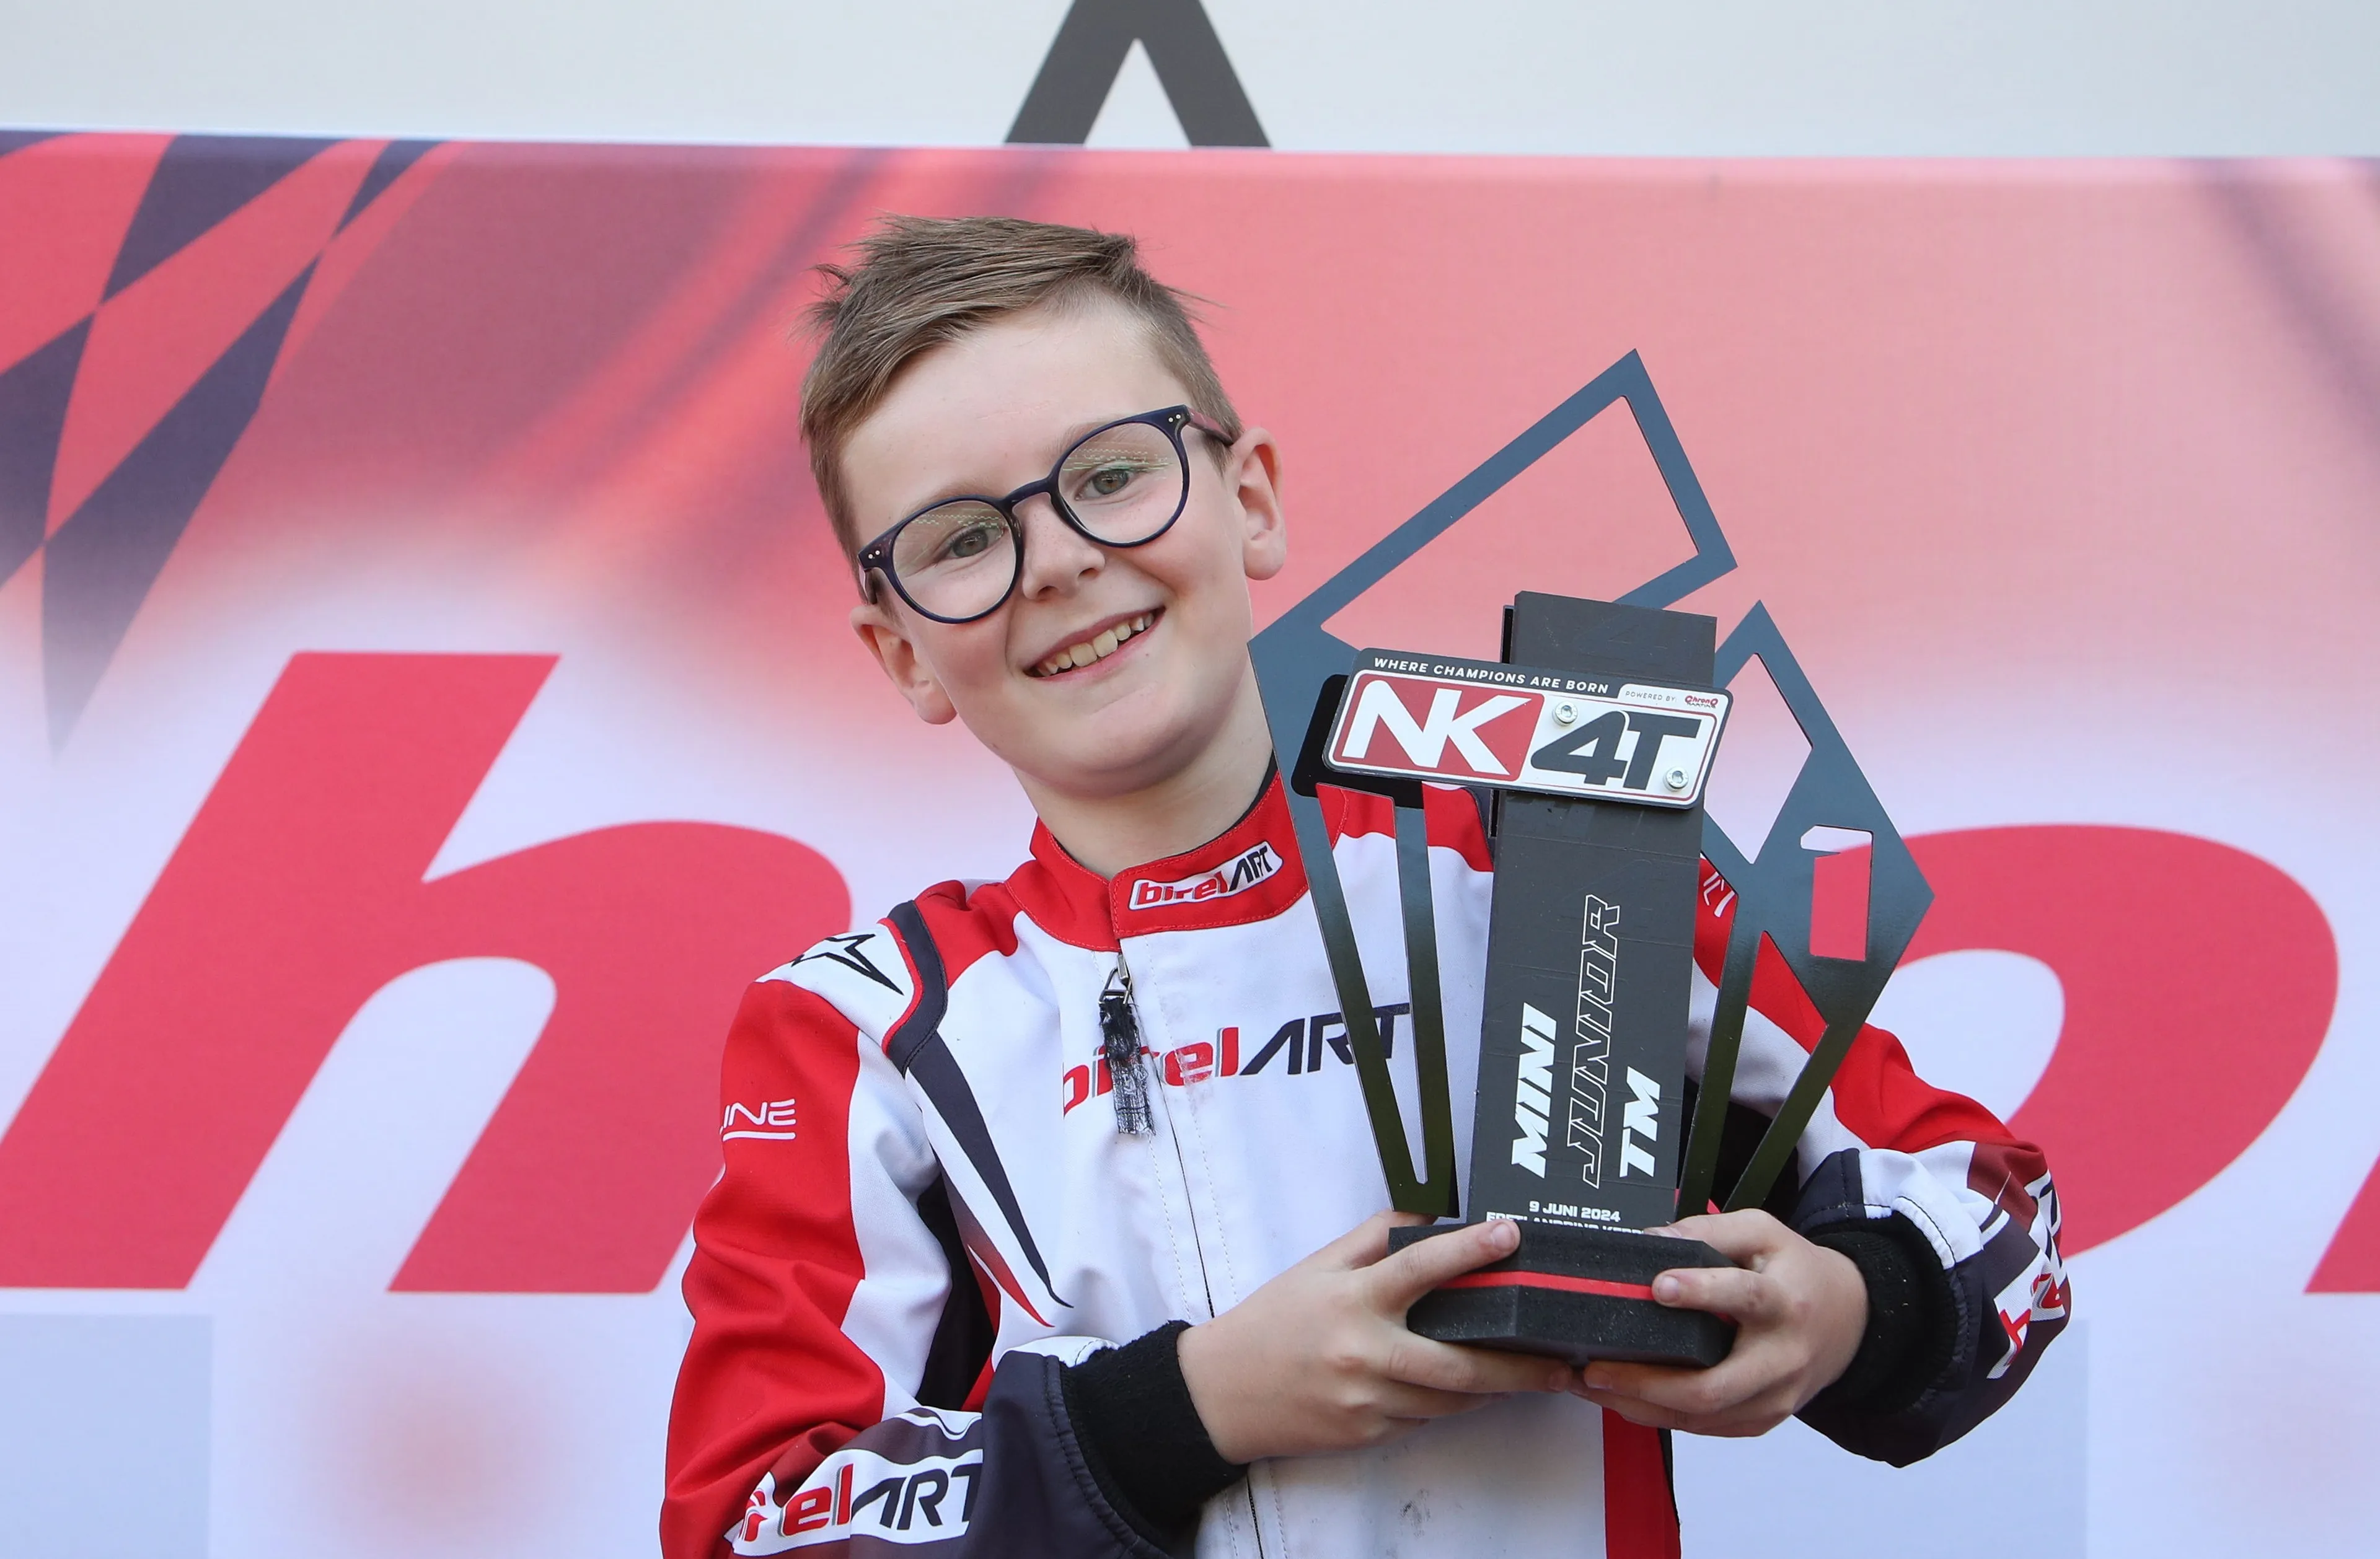 cees muys wint nk karting